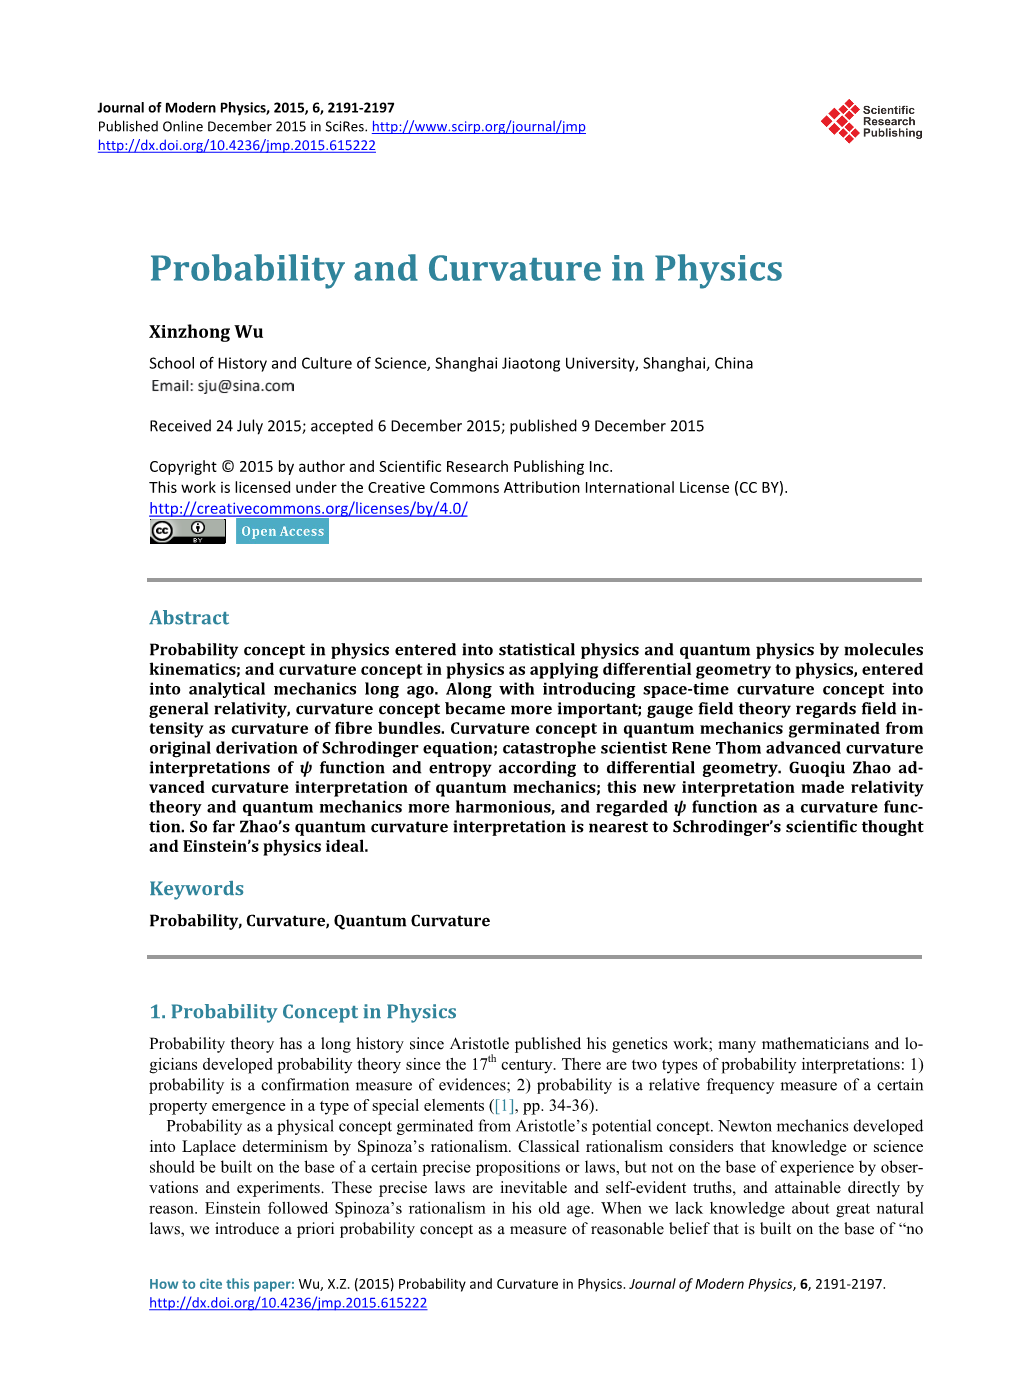 Probability and Curvature in Physics